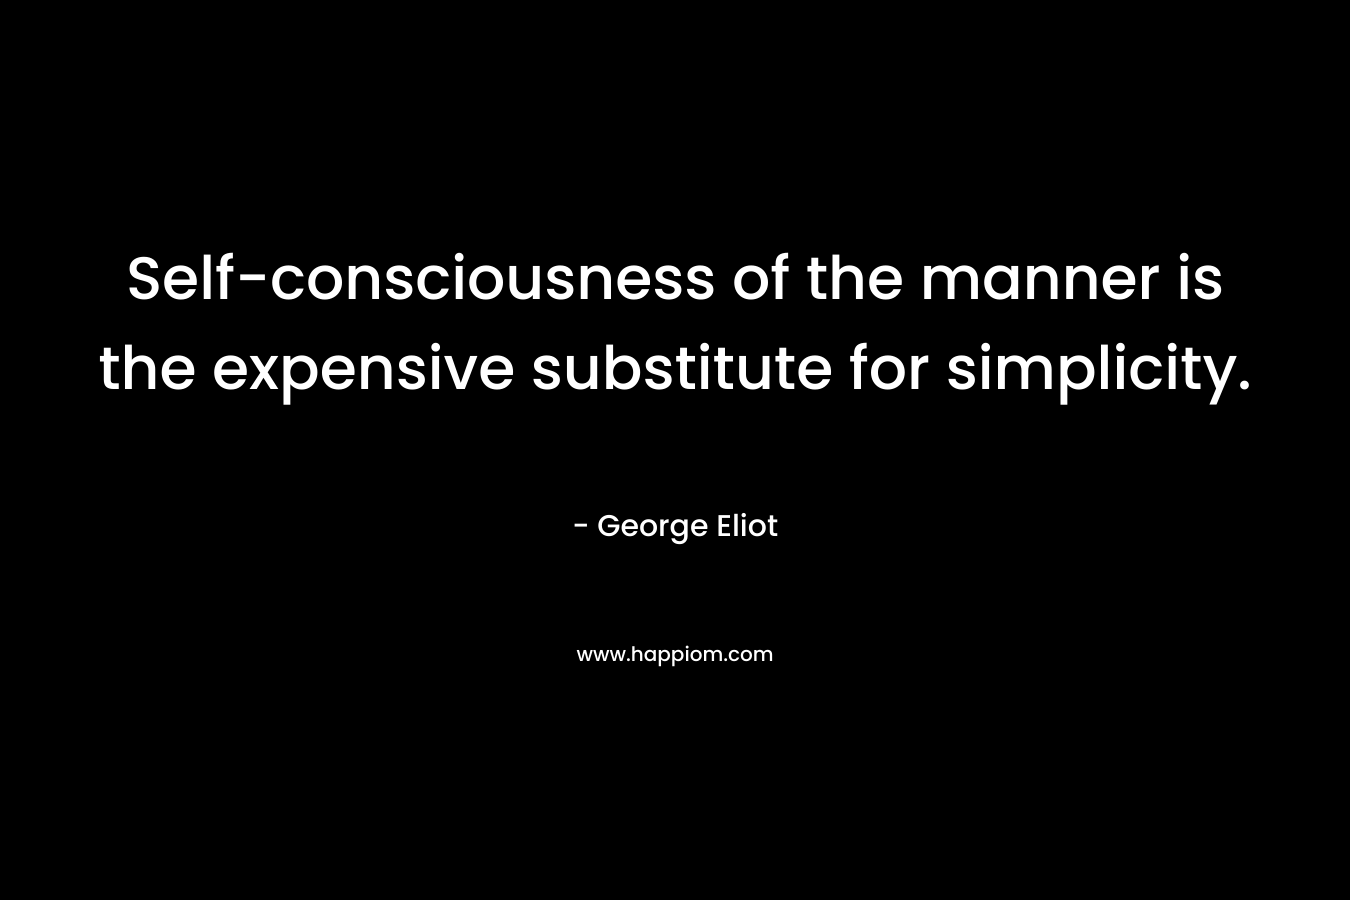 Self-consciousness of the manner is the expensive substitute for simplicity. – George Eliot